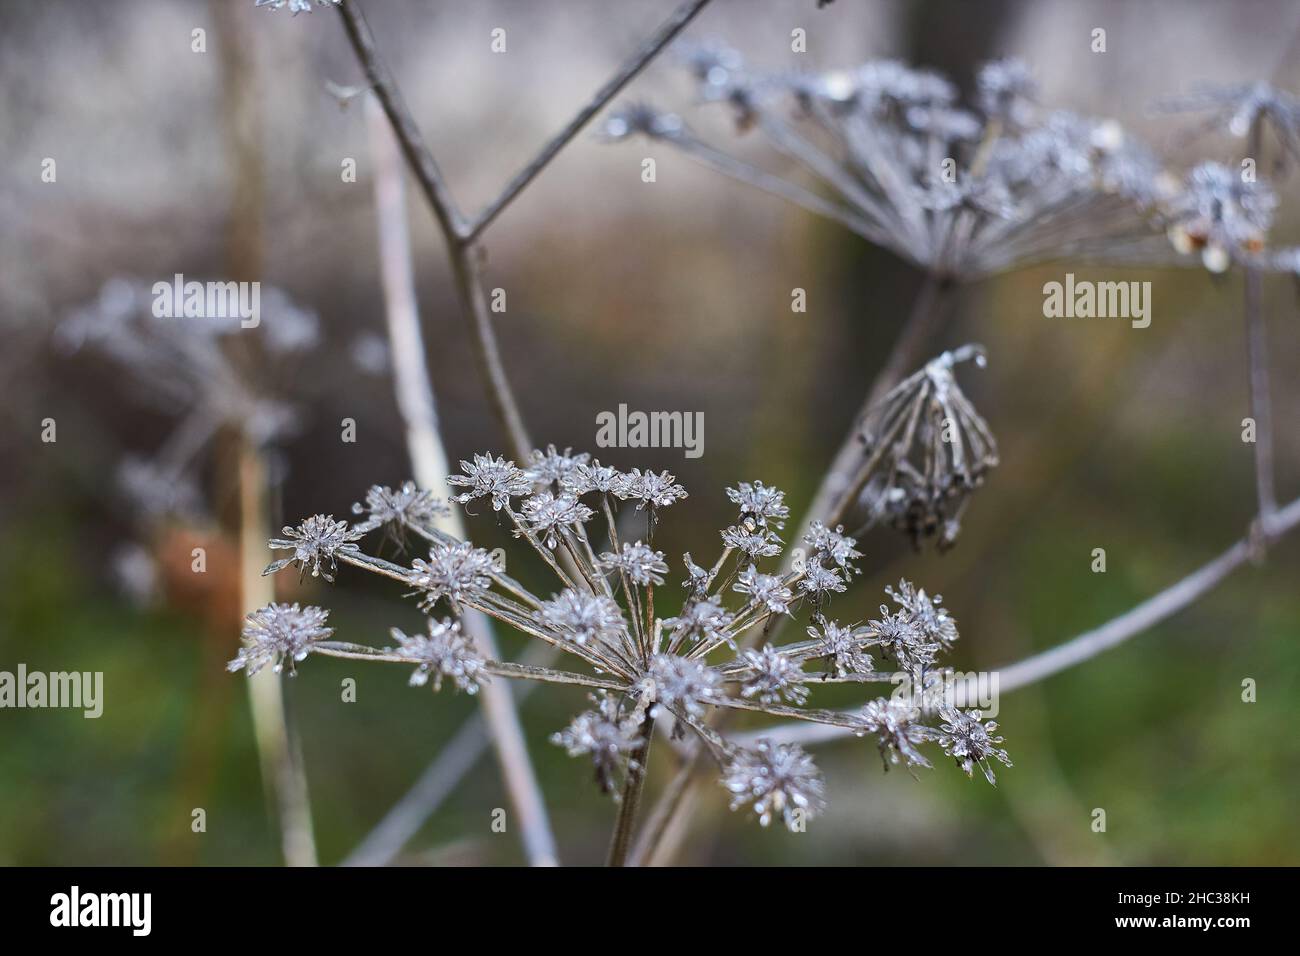 Umbelliferae (Apiaceae) plants covered with ice. Consequences of freezing rain Stock Photo